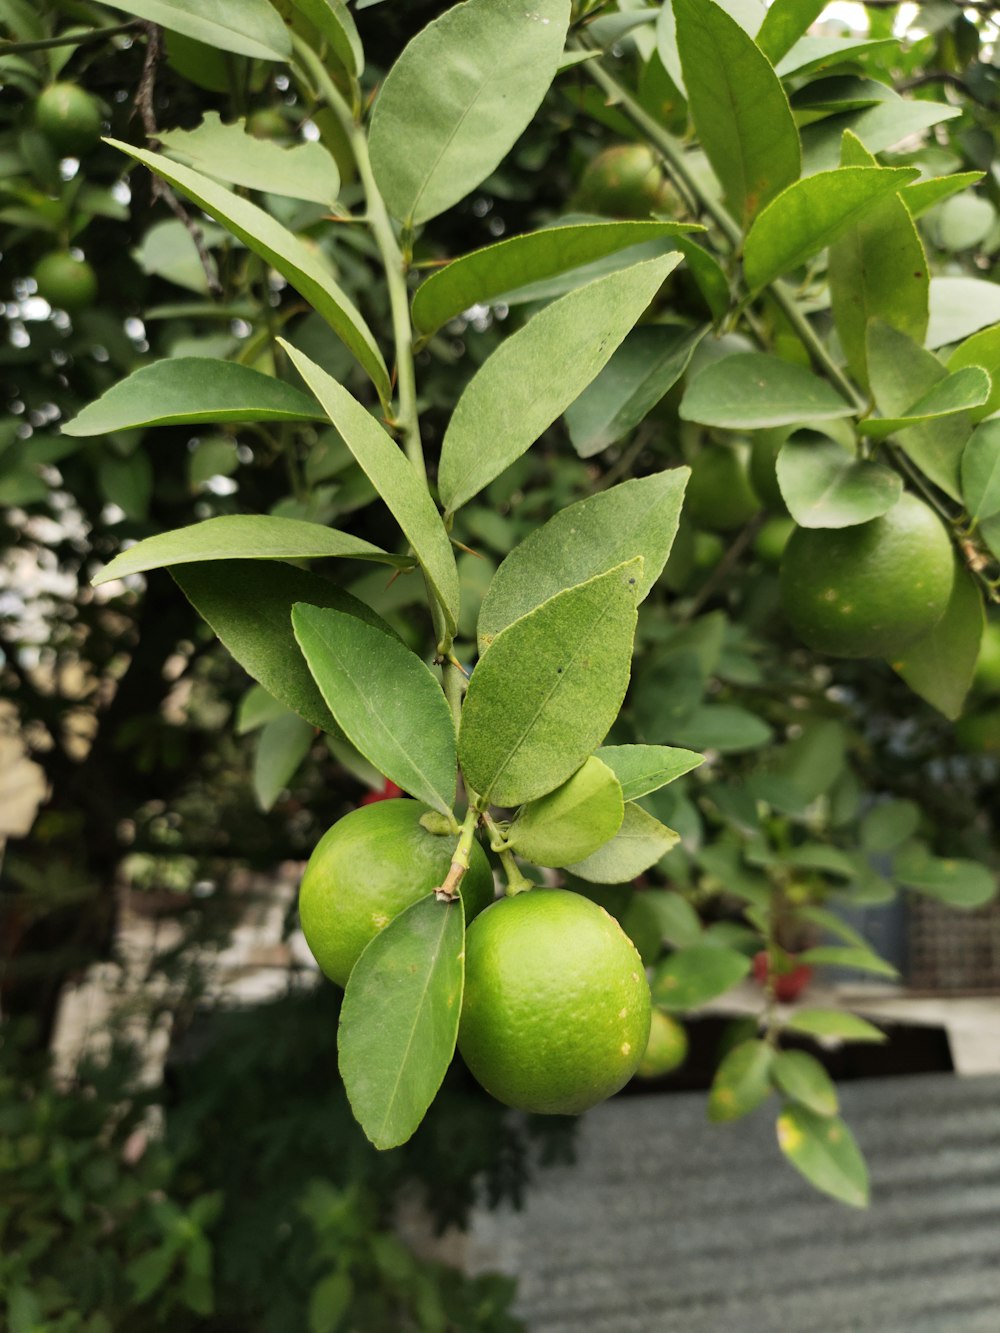 round green citrus fruits hanging from a tree